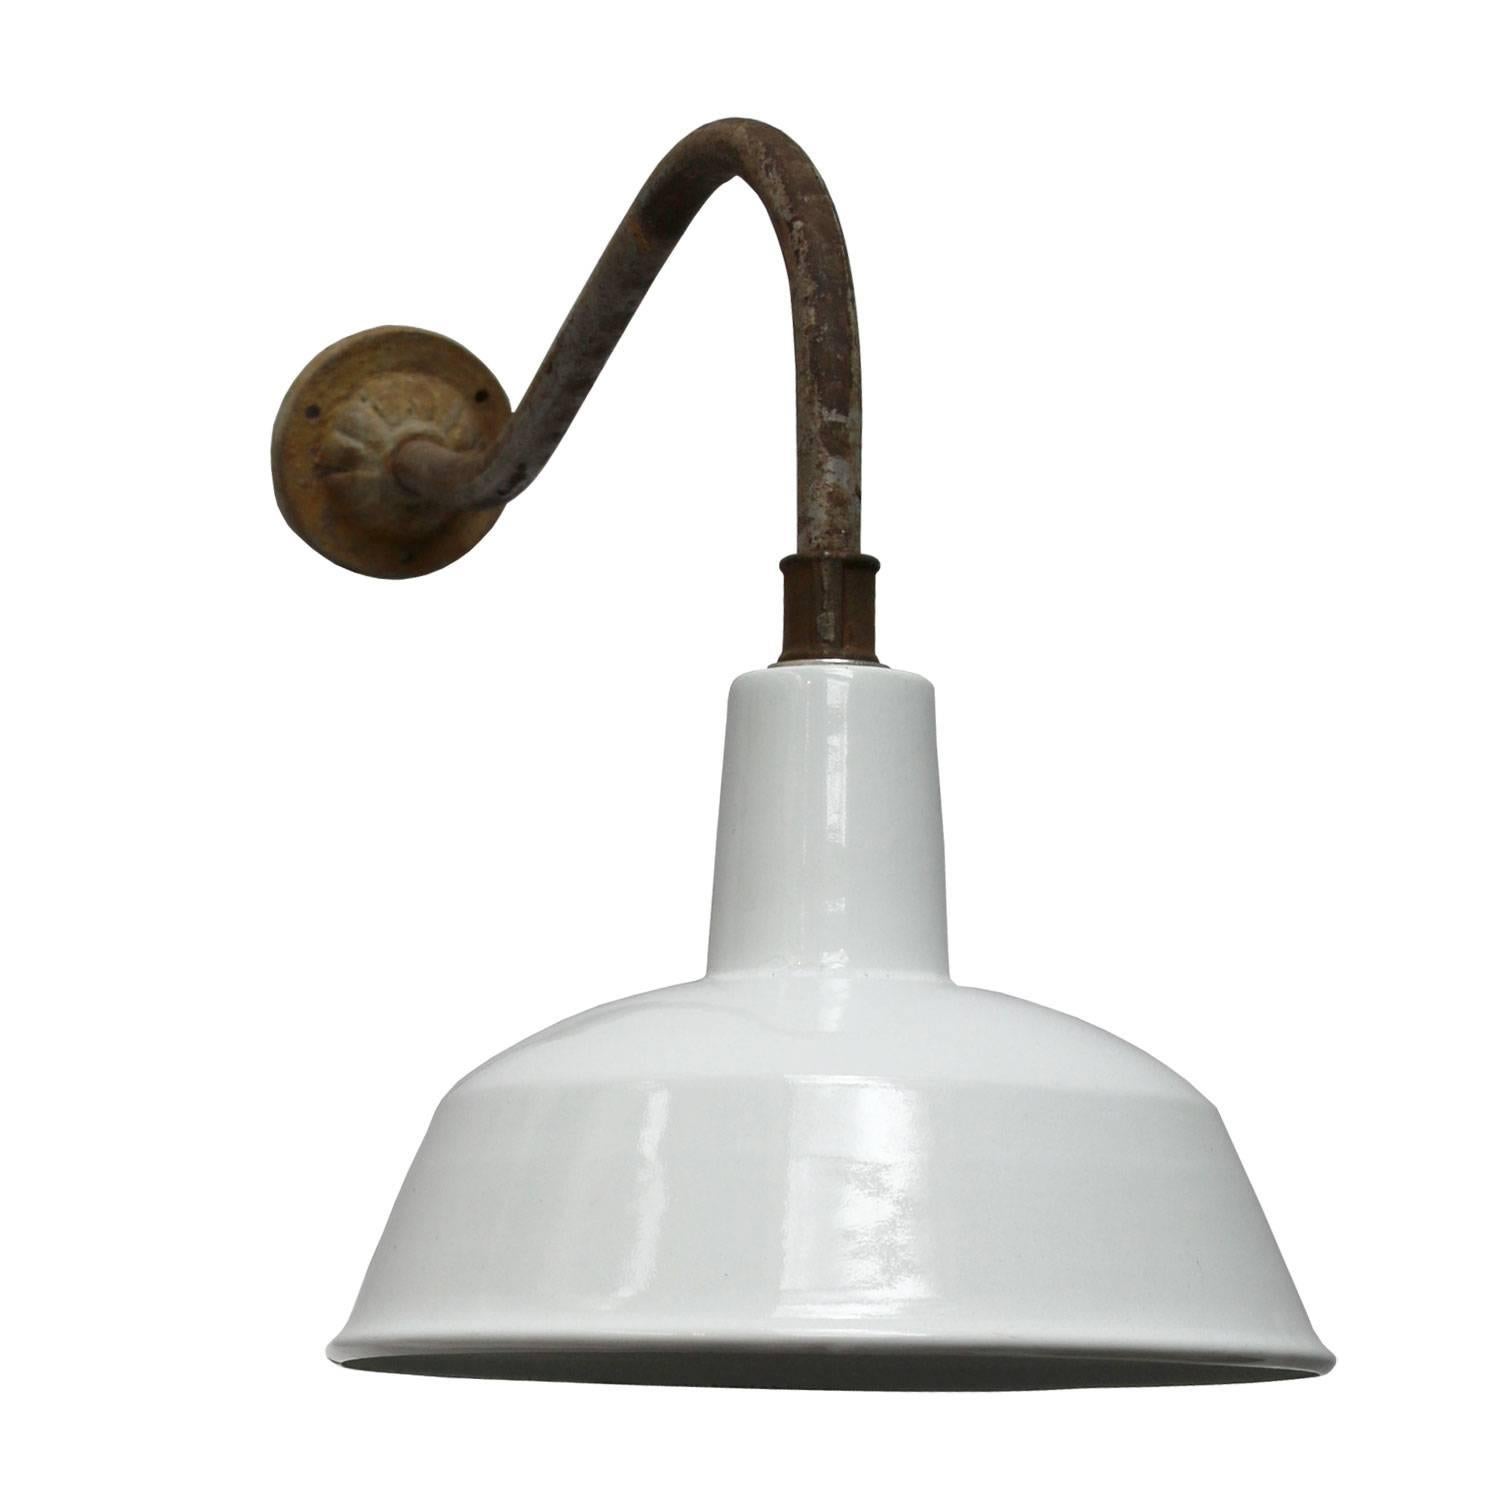 White enamel industrial wall light with white interior.

Measures: Diameter cast iron wall mount 9 cm, 3 holes to secure.

Weight: 2.1 kg / 4.6 lb

Priced per individual item. All lamps have been made suitable by international standards for